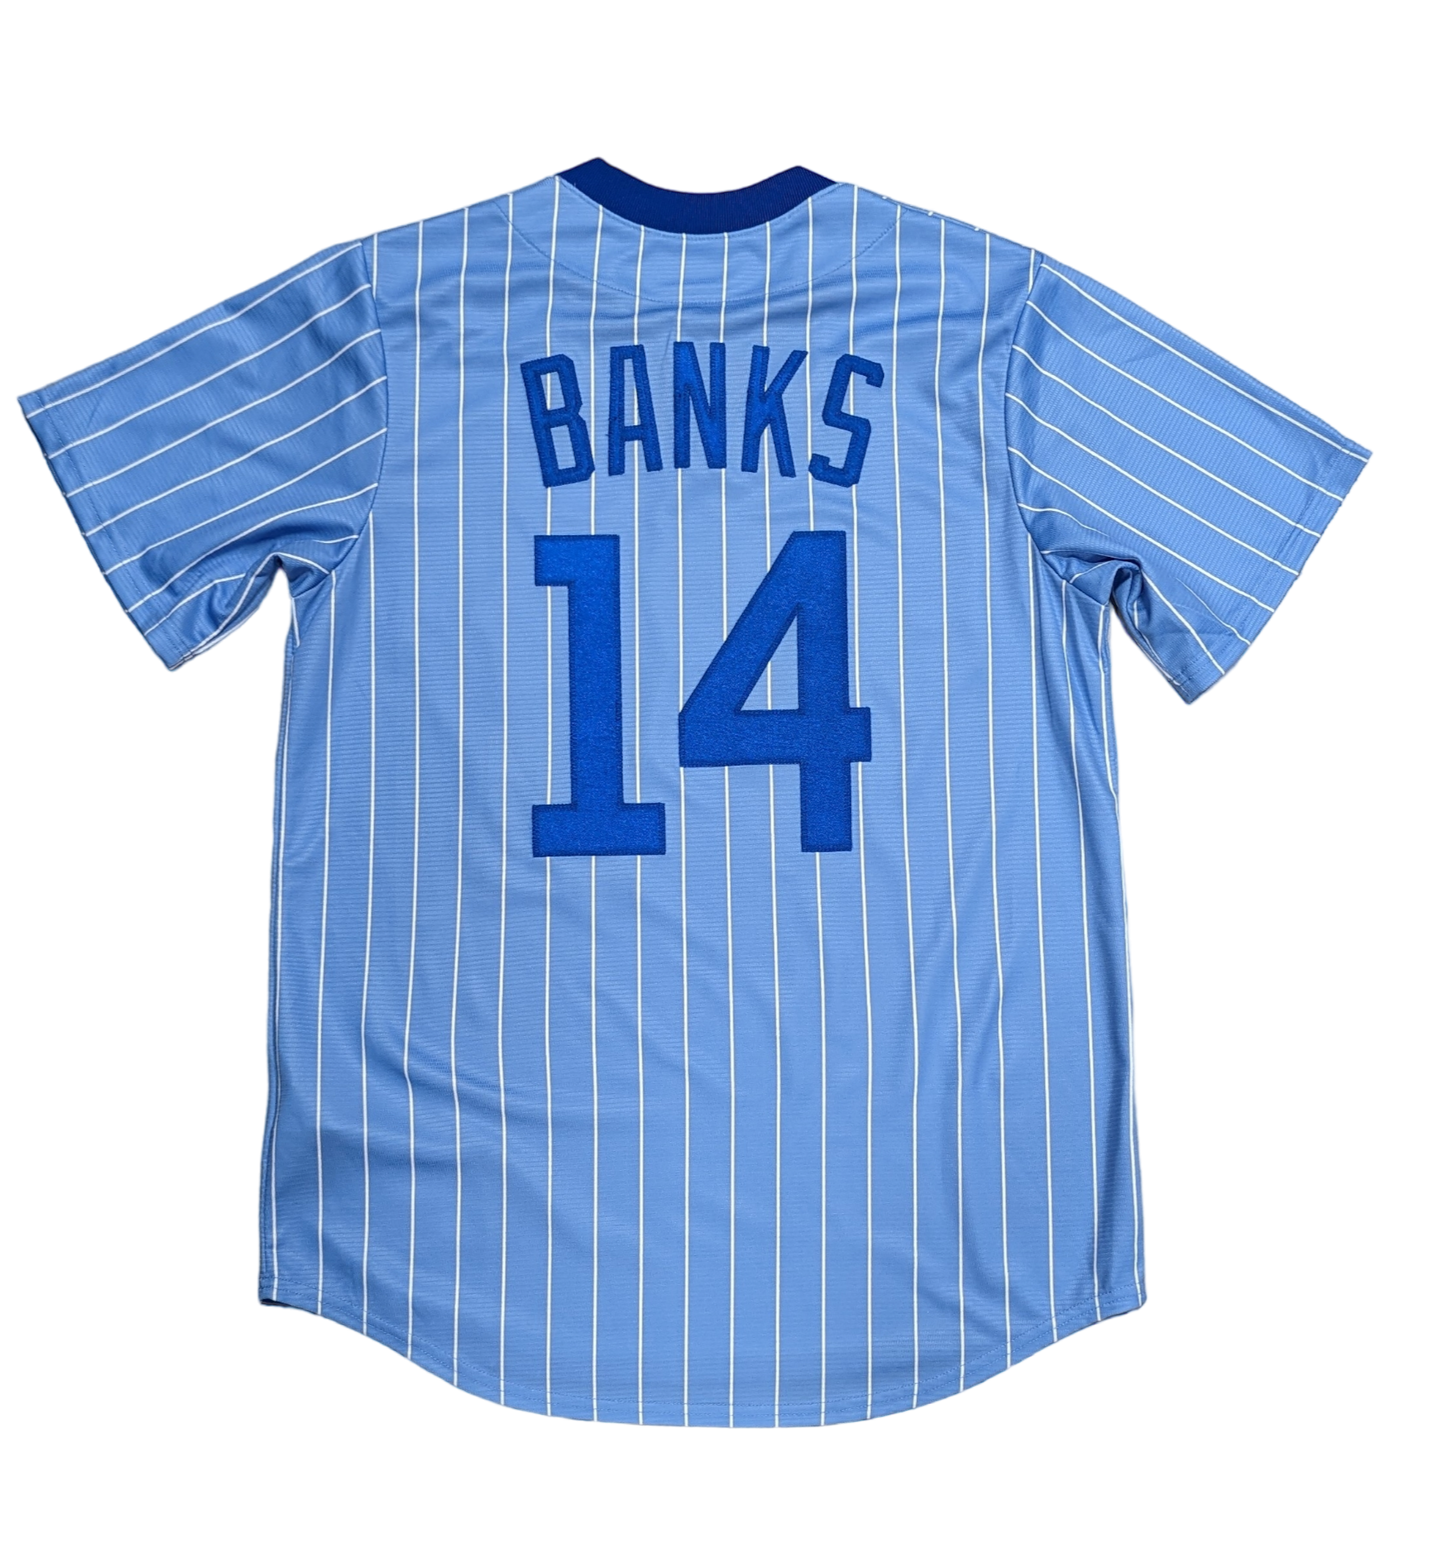 Men's Ernie Banks Chicago Cubs Cooperstown Powder Blue 1978 NIKE Replica Jersey